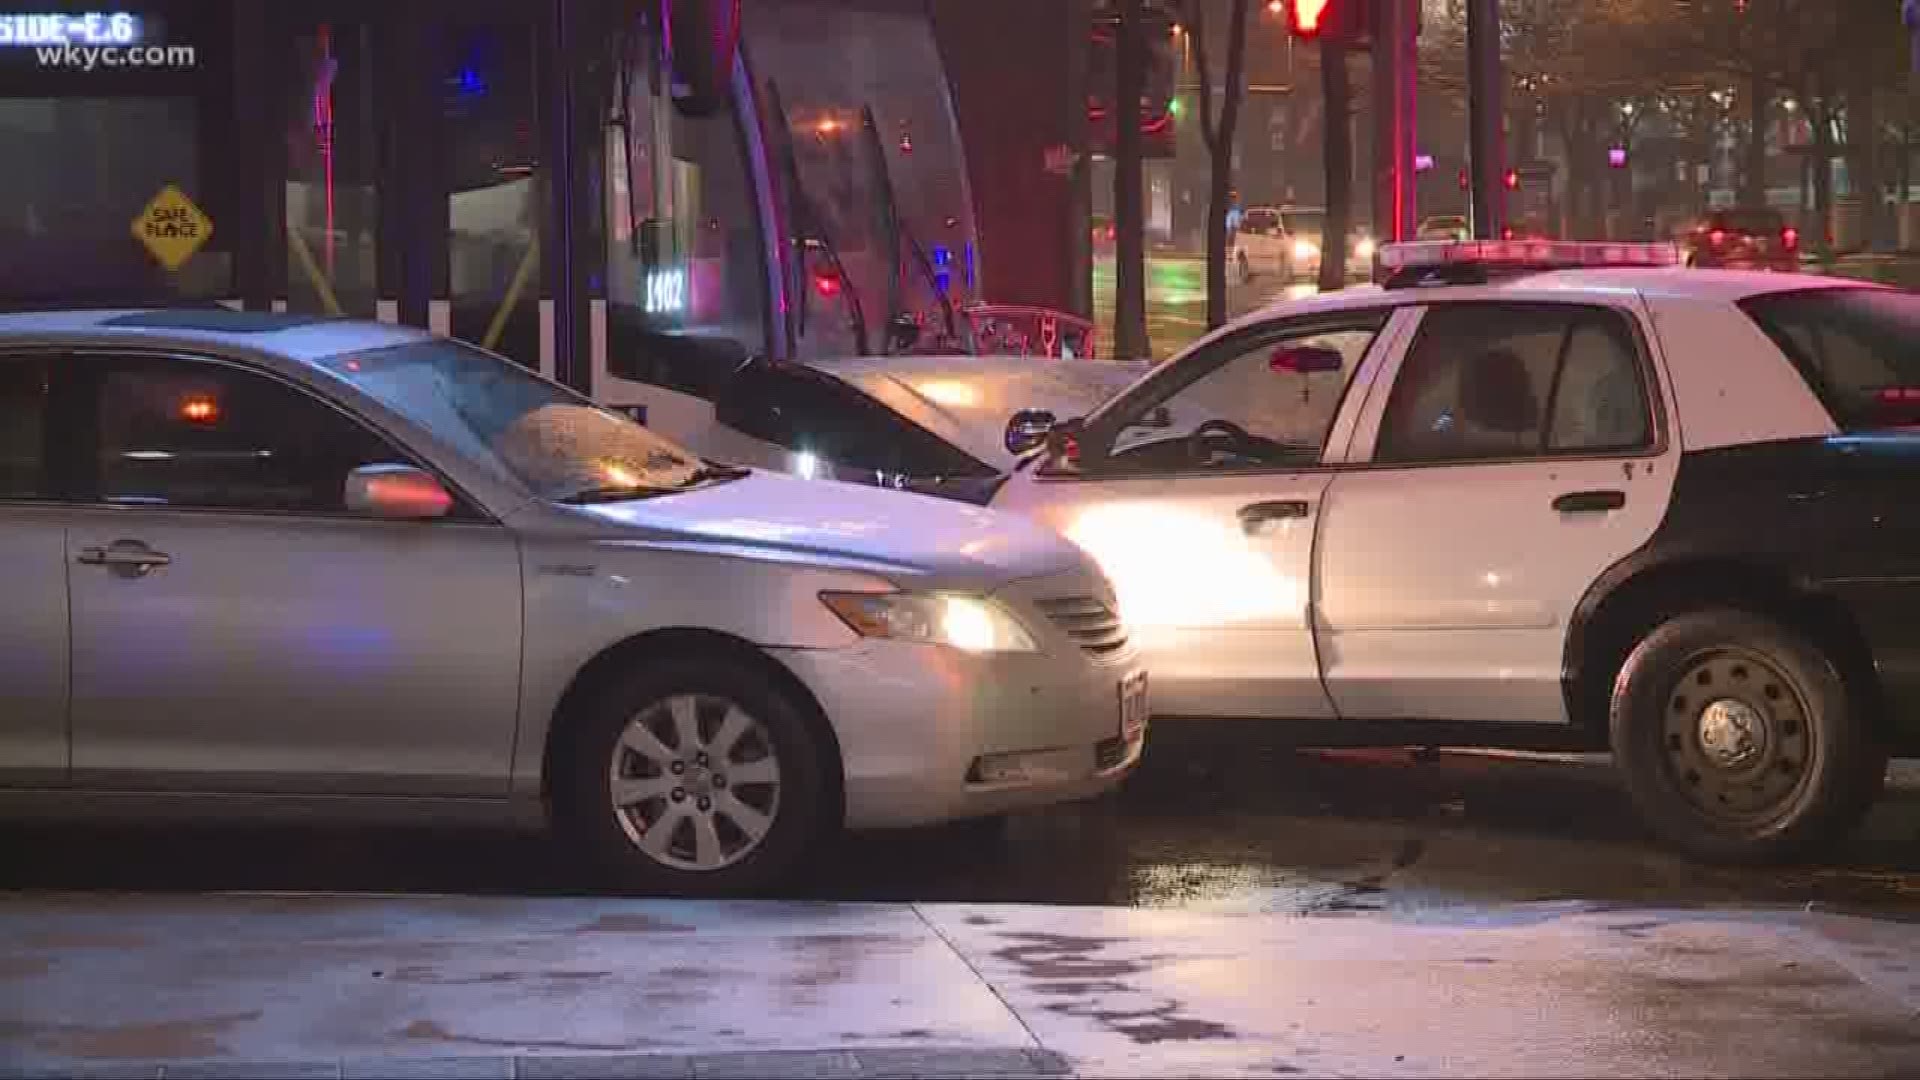 Police cruiser crashes into RTA bus, multiple cars and injures pedestrian in downtown Cleveland